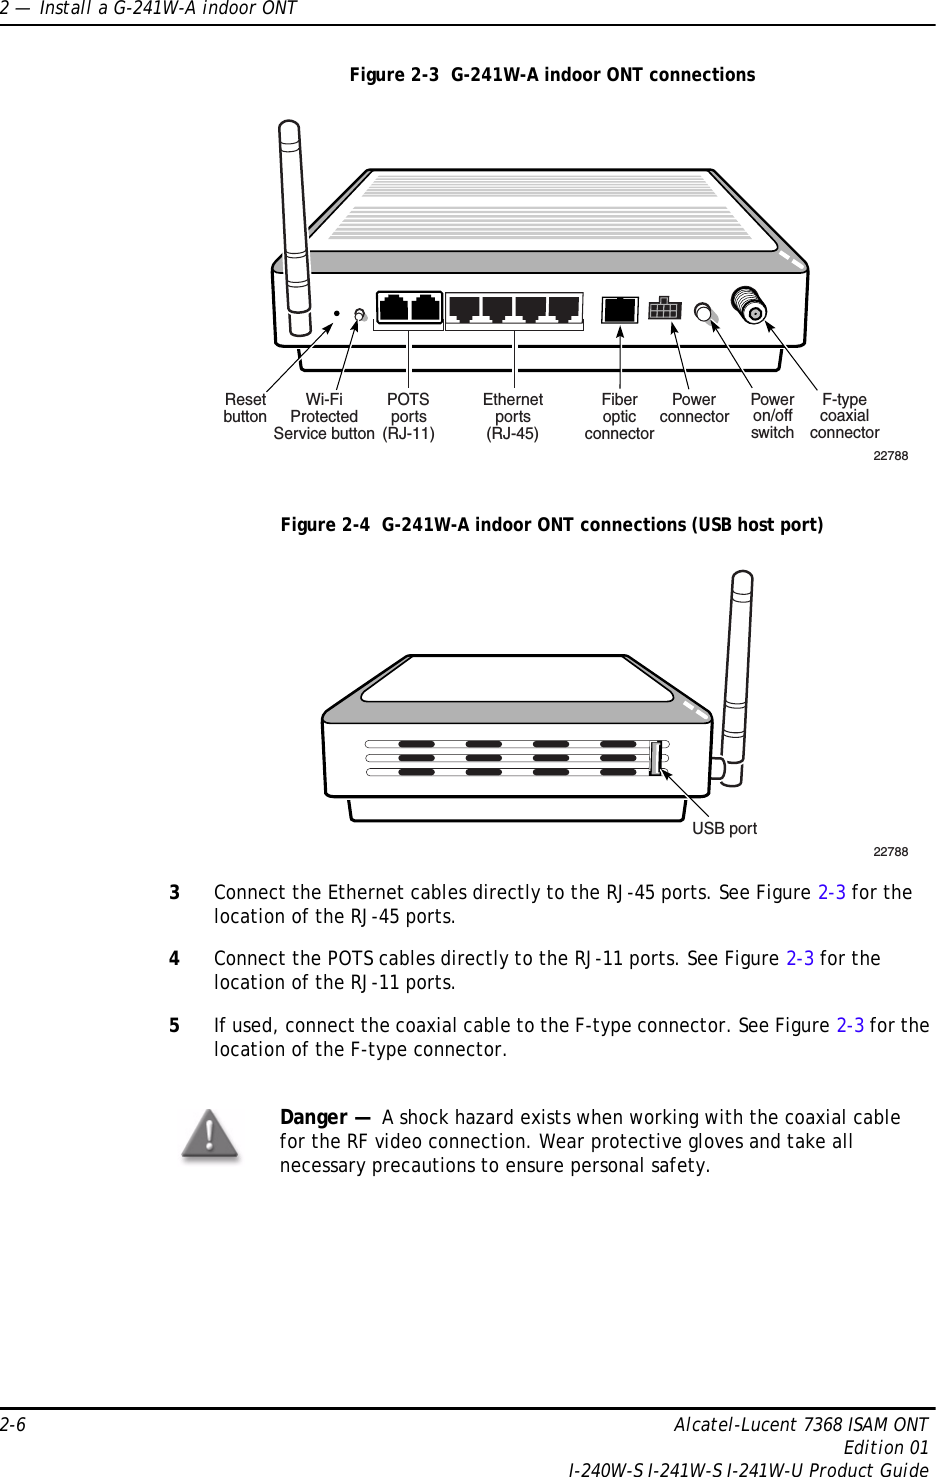 2 —  Install a G-241W-A indoor ONT2-6 Alcatel-Lucent 7368 ISAM ONTEdition 01I-240W-S I-241W-S I-241W-U Product GuideFigure 2-3  G-241W-A indoor ONT connectionsFigure 2-4  G-241W-A indoor ONT connections (USB host port)3Connect the Ethernet cables directly to the RJ-45 ports. See Figure 2-3 for the location of the RJ-45 ports.4Connect the POTS cables directly to the RJ-11 ports. See Figure 2-3 for the location of the RJ-11 ports.5If used, connect the coaxial cable to the F-type connector. See Figure 2-3 for the location of the F-type connector.Danger —  A shock hazard exists when working with the coaxial cable for the RF video connection. Wear protective gloves and take all necessary precautions to ensure personal safety.Wi-FiProtectedService buttonResetbuttonPOTSports(RJ-11)Ethernetports(RJ-45)FiberopticconnectorPowerconnectorPoweron/offswitchF-typecoaxialconnector22788USB port22788